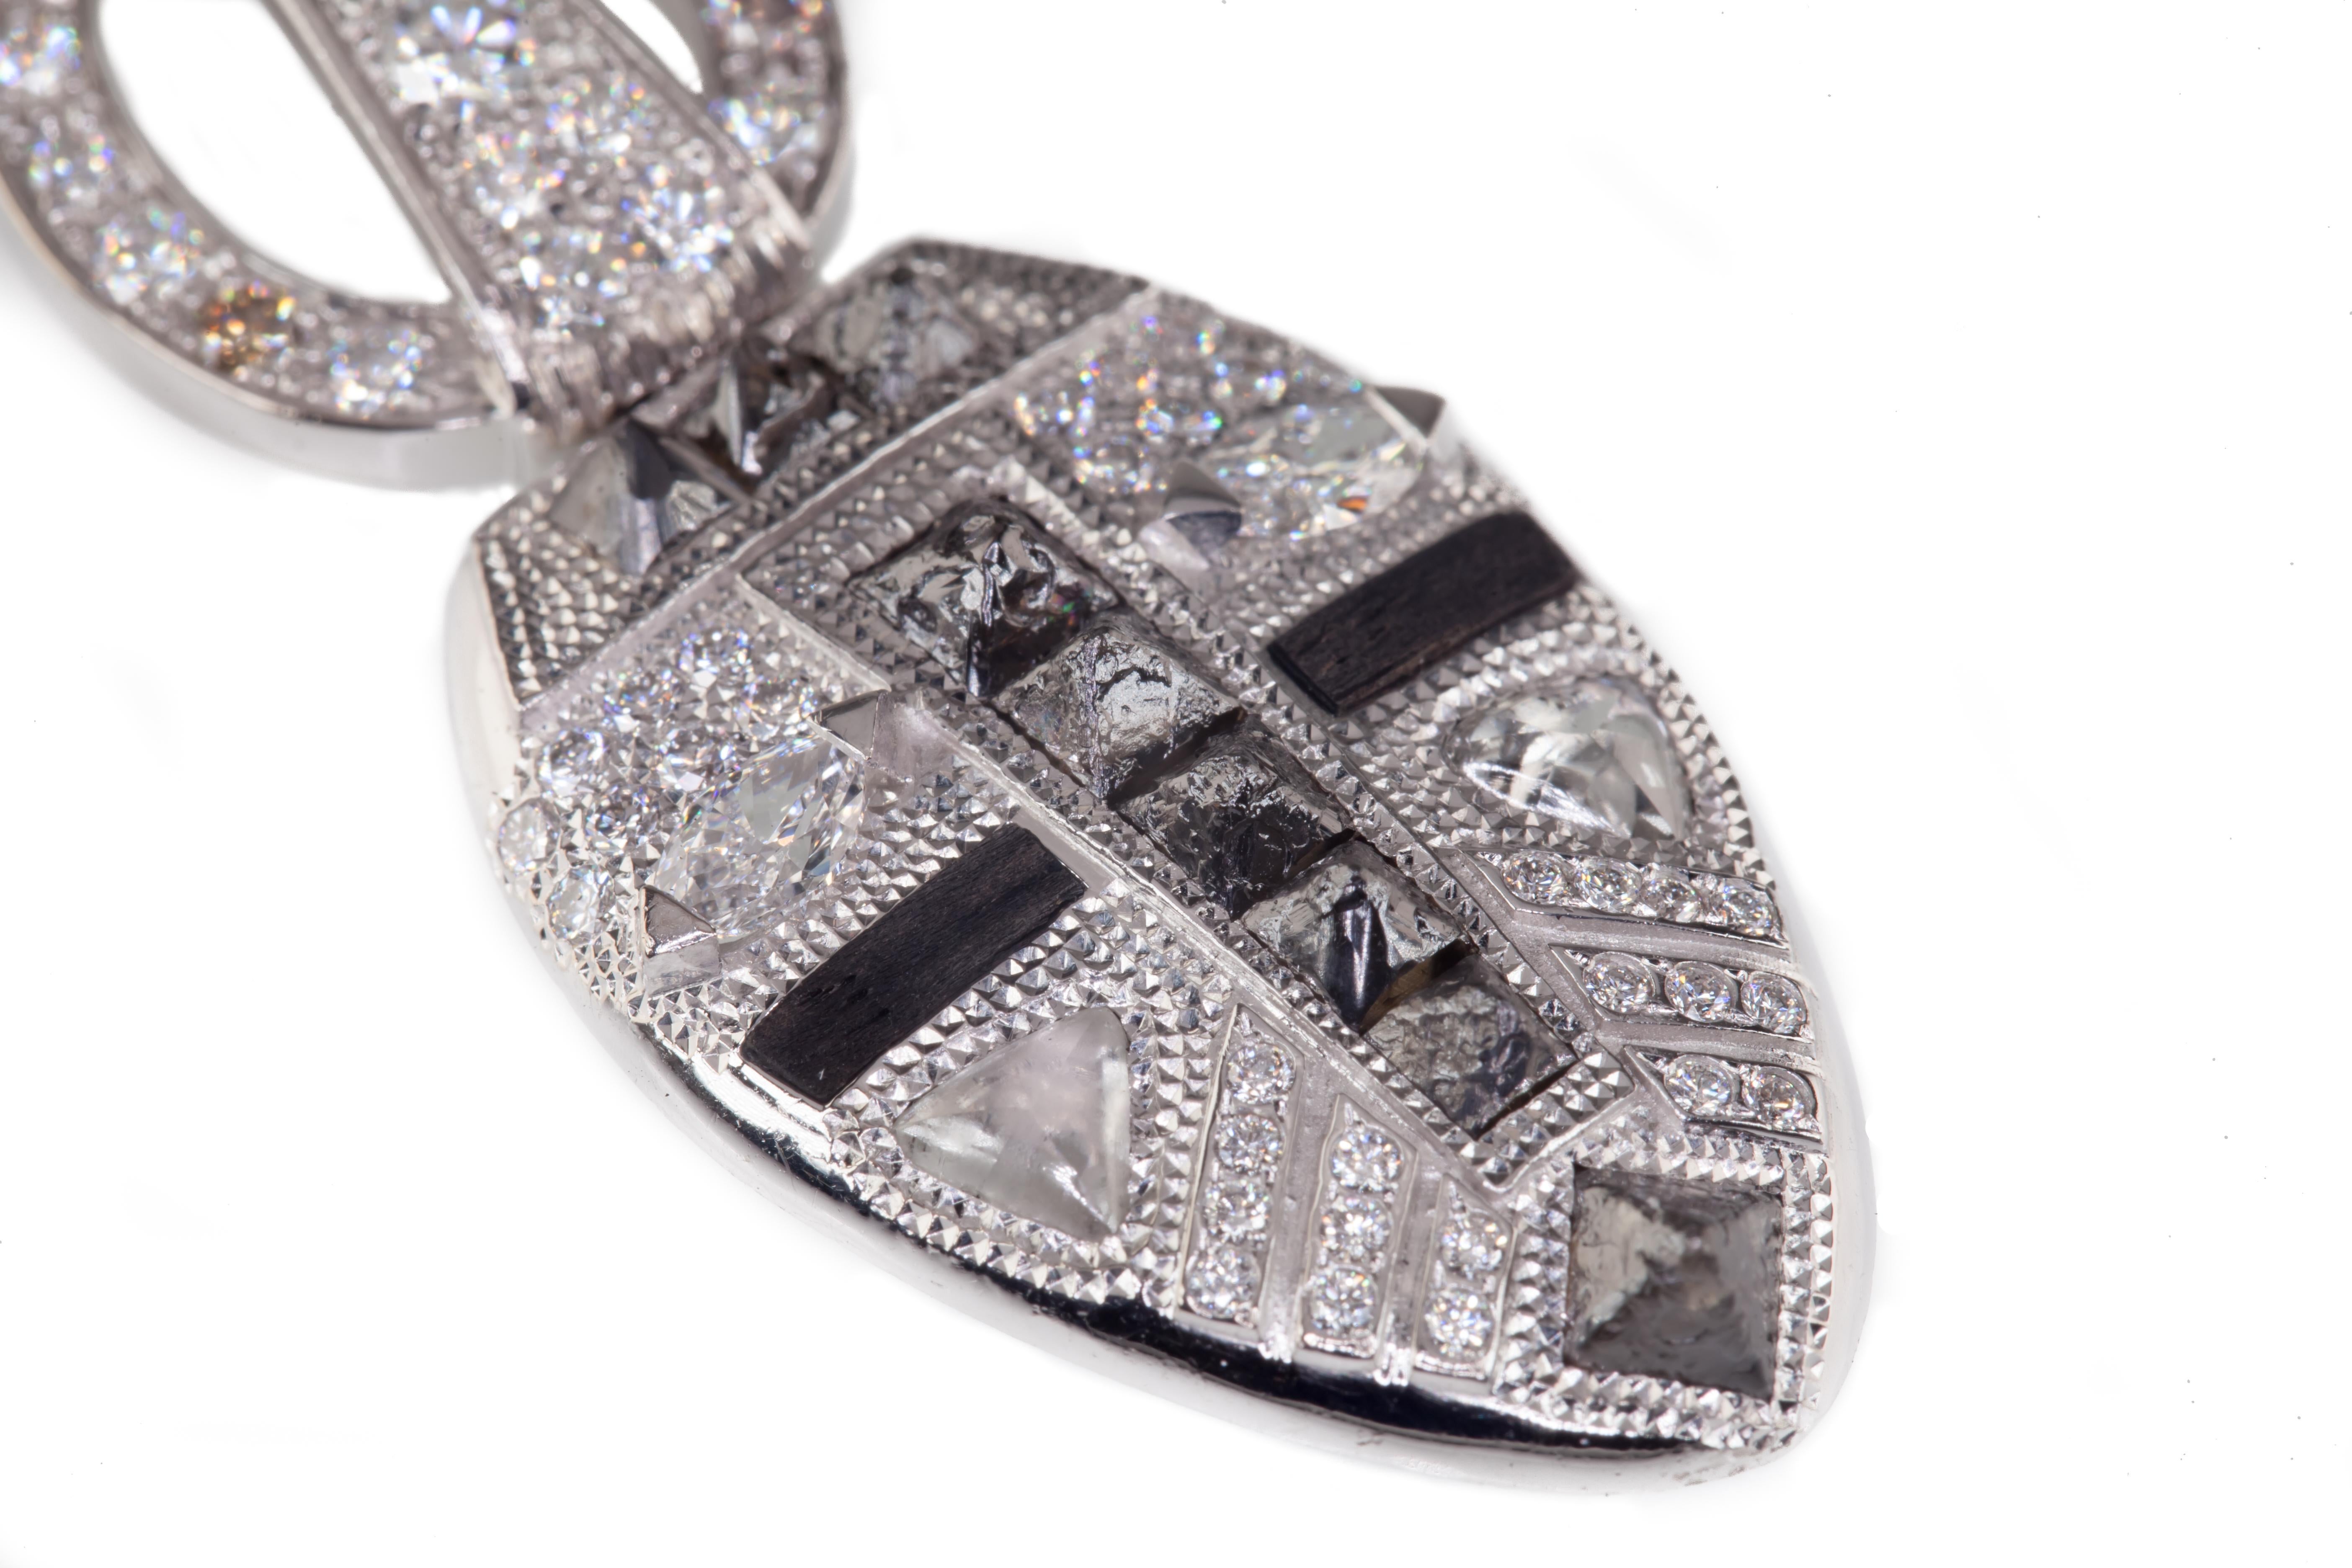 Rough Cut De Beers Rough Diamond Yayadhama Amulet Pendant from Talisman Collection For Sale